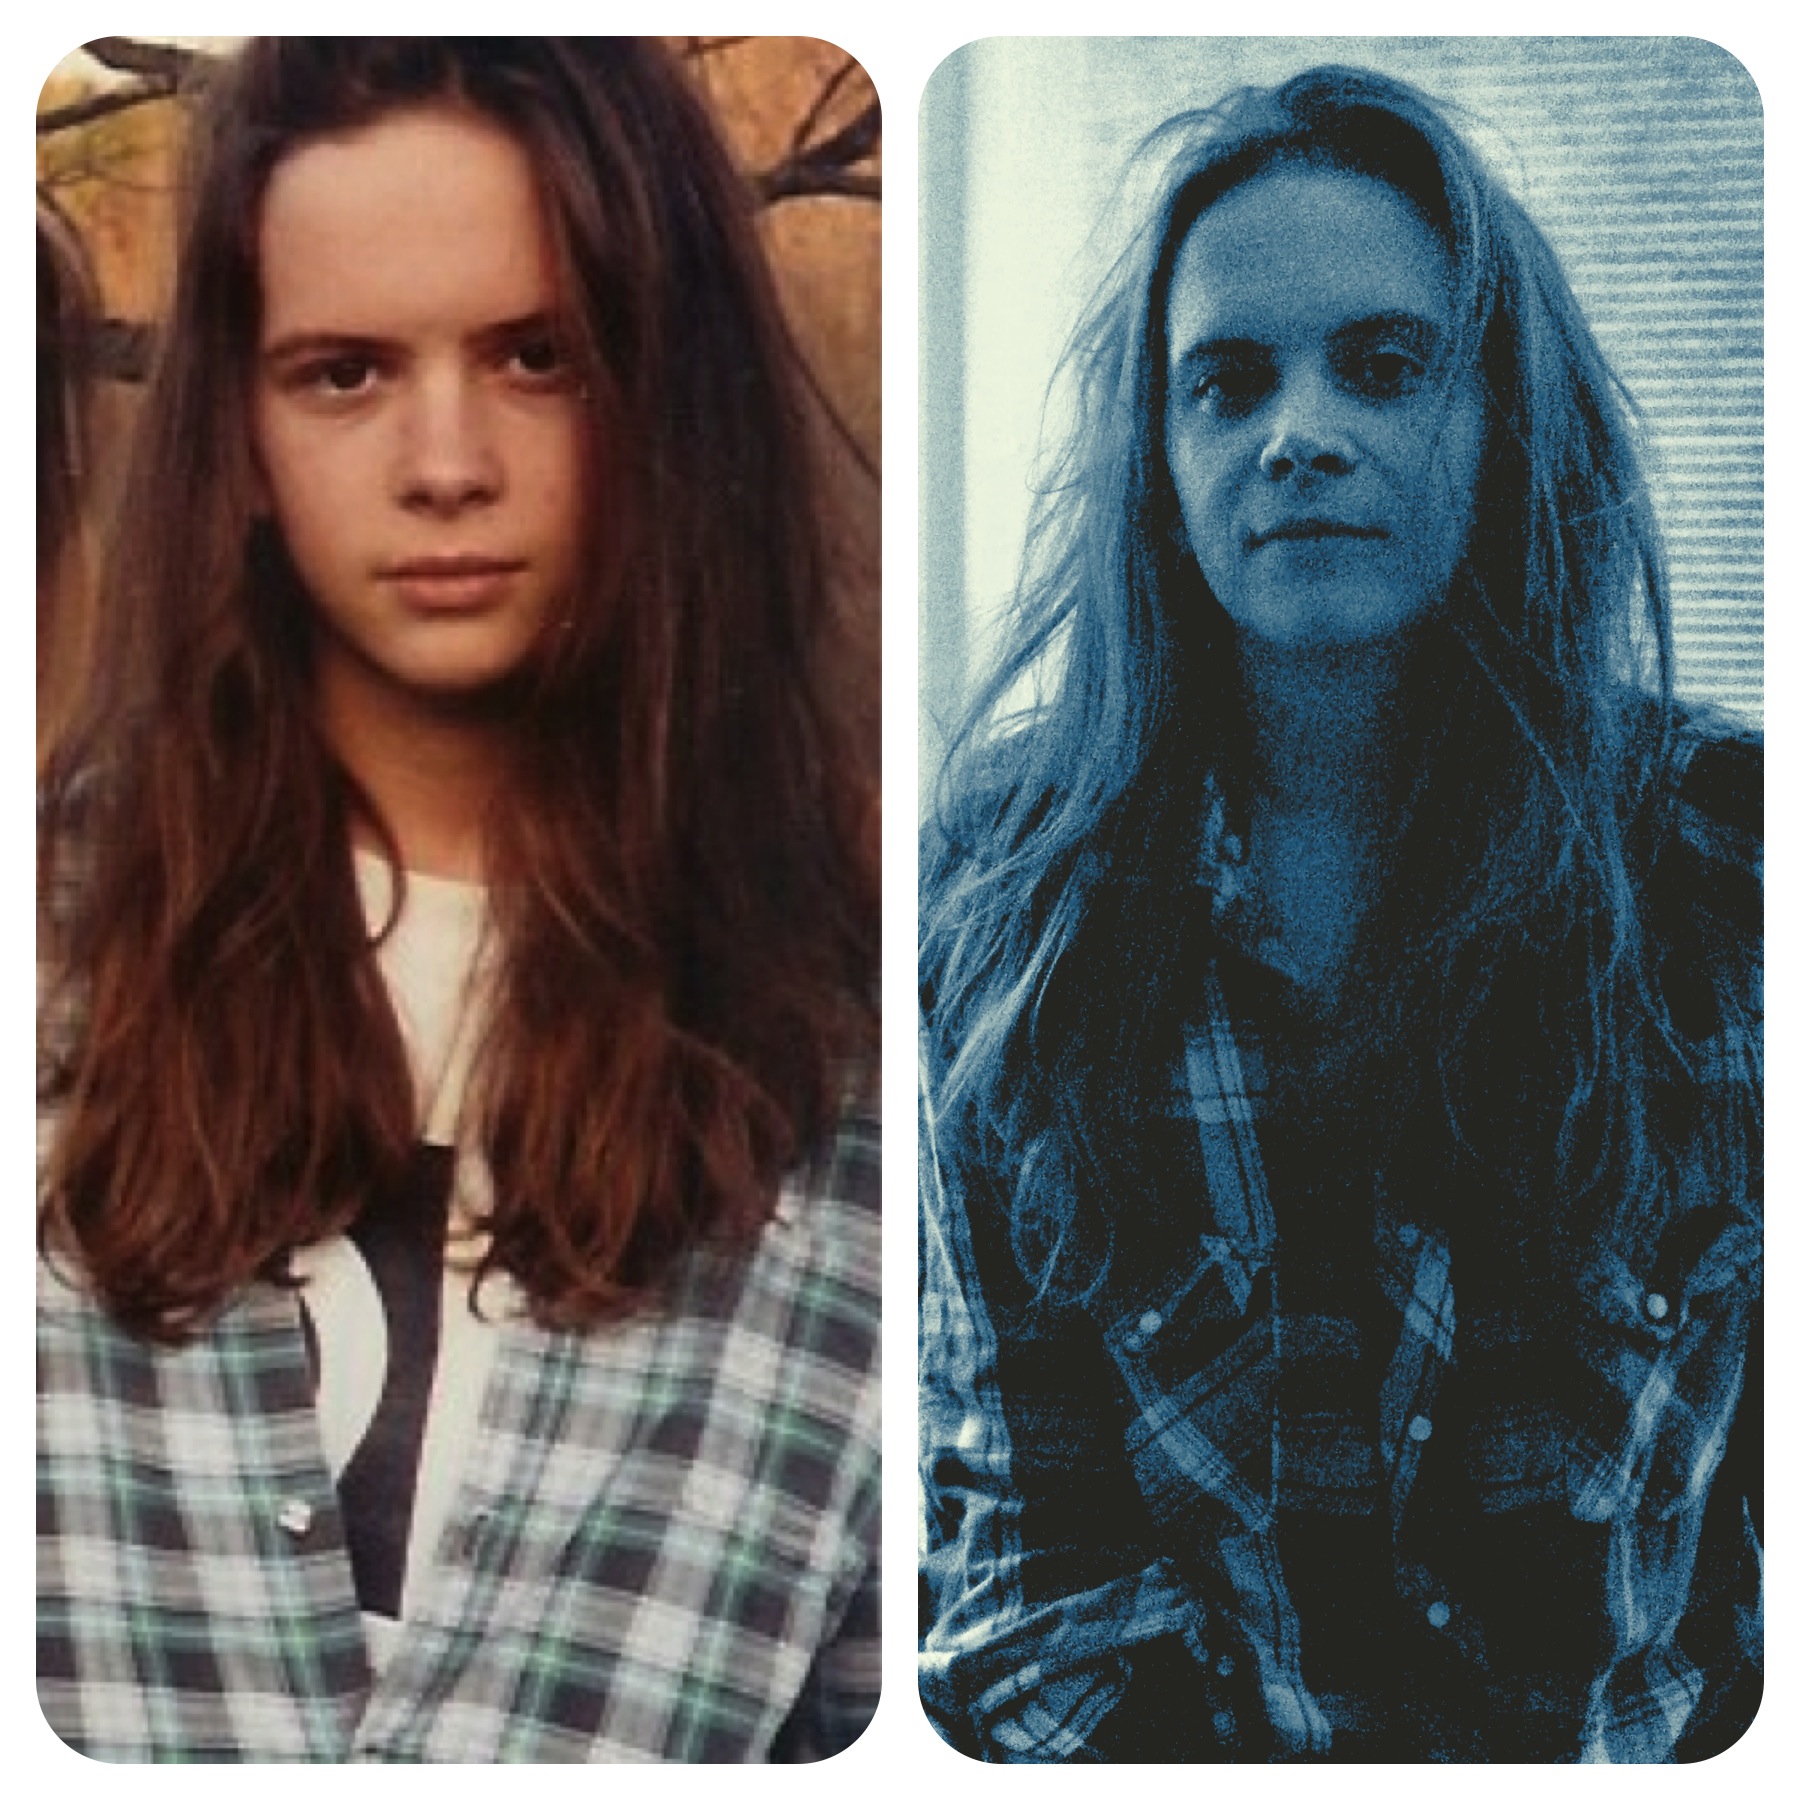 Me at 14 v. Me at 34. Believe it or not there was a decade where my hair was other colors and lengths and I never wore flannel.